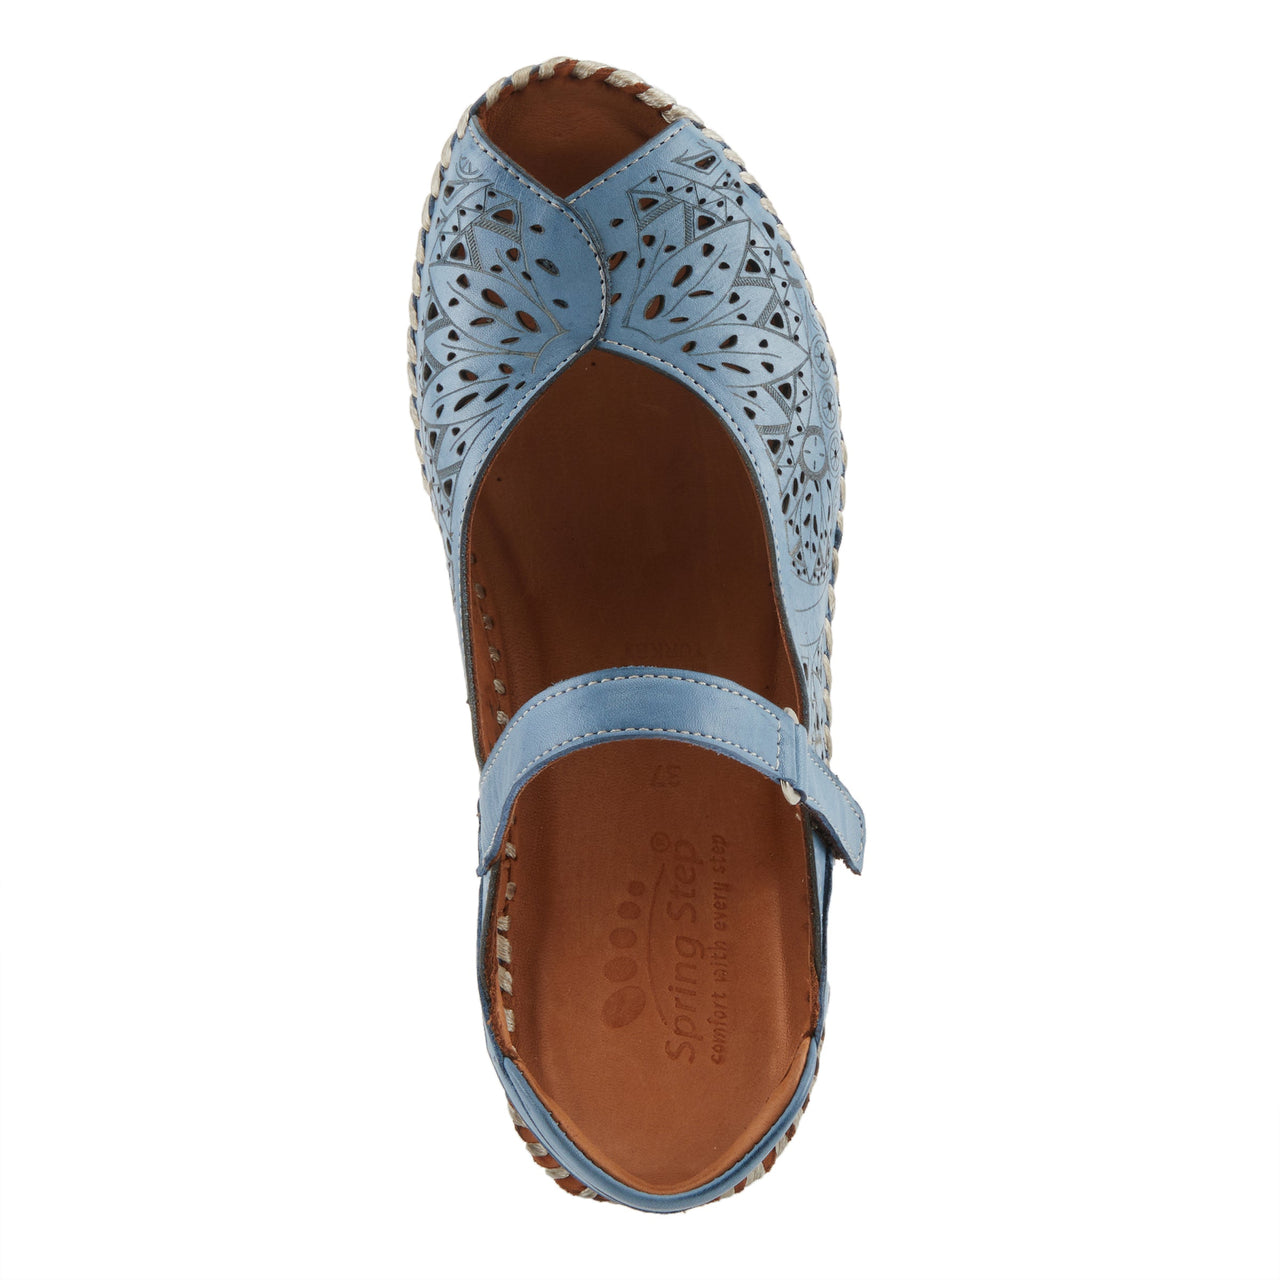 Spring Step Santonio Sandals featuring a cushioned footbed for arch support